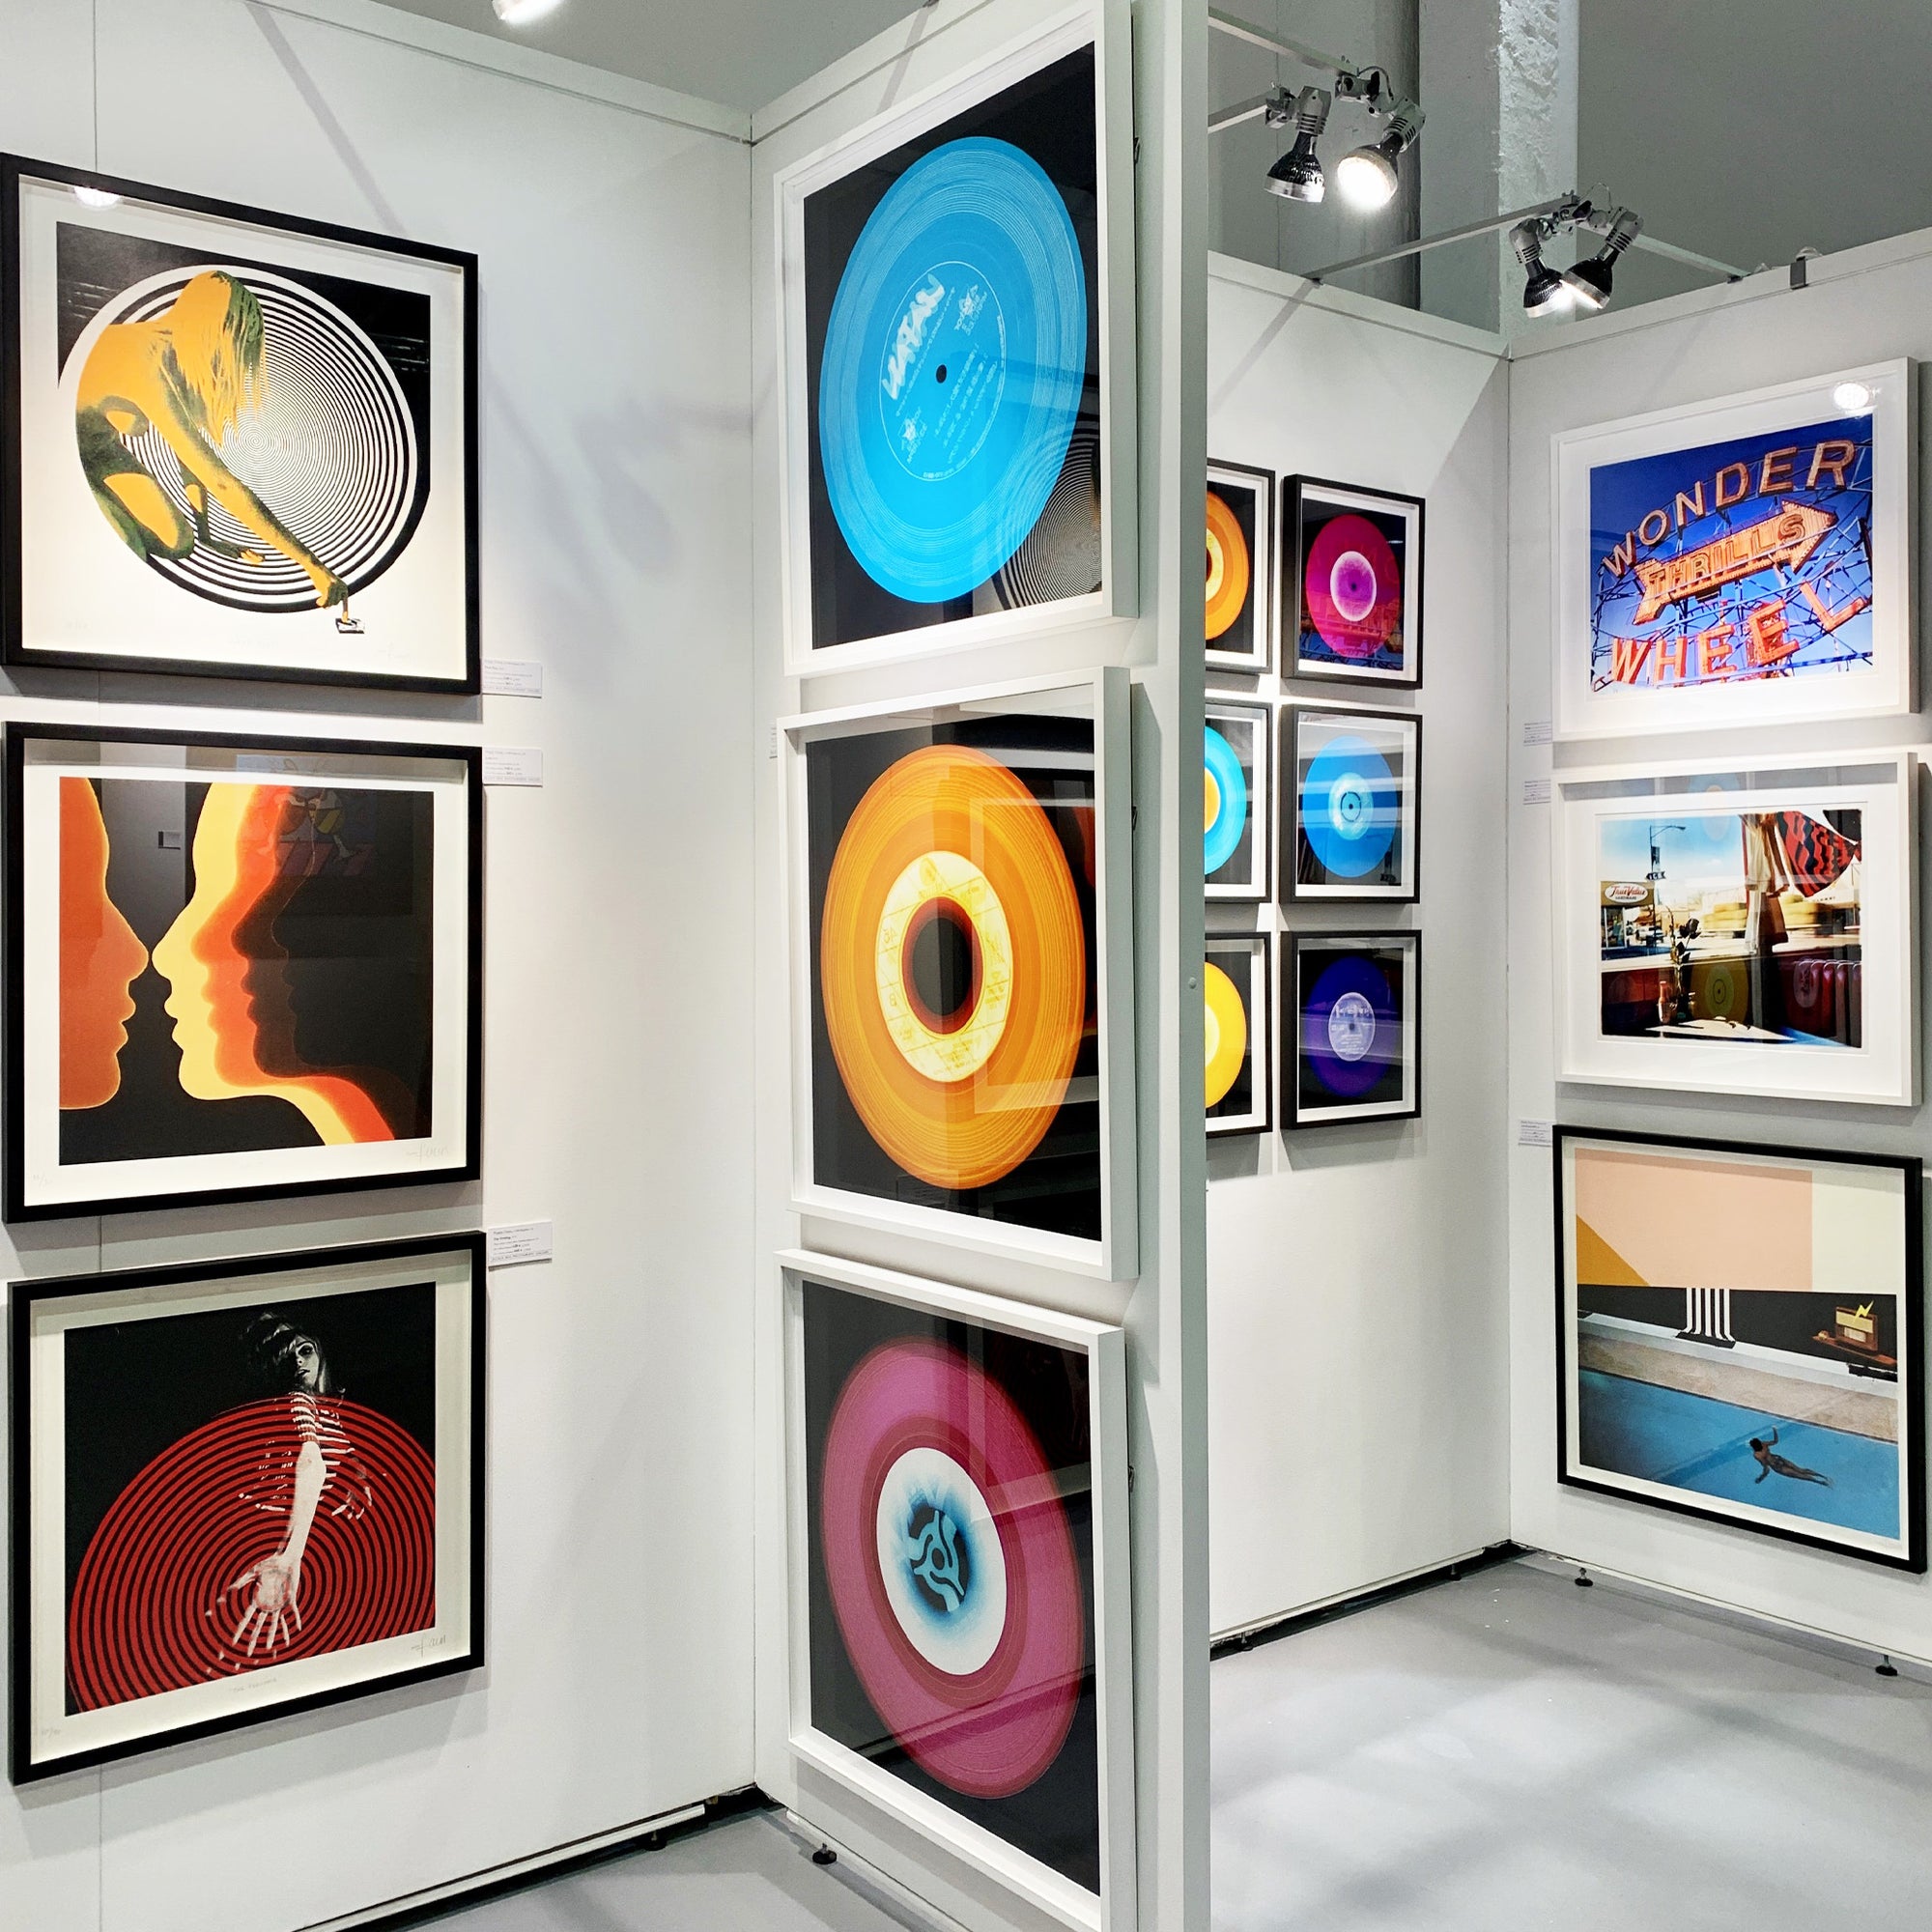 'Three Minutes Thirty (Ultraviolet)', by acclaimed contemporary photographers, Richard Heeps and Natasha Heidler. Their Vinyl Collection is a celebration of the vinyl record and analogue technology. 